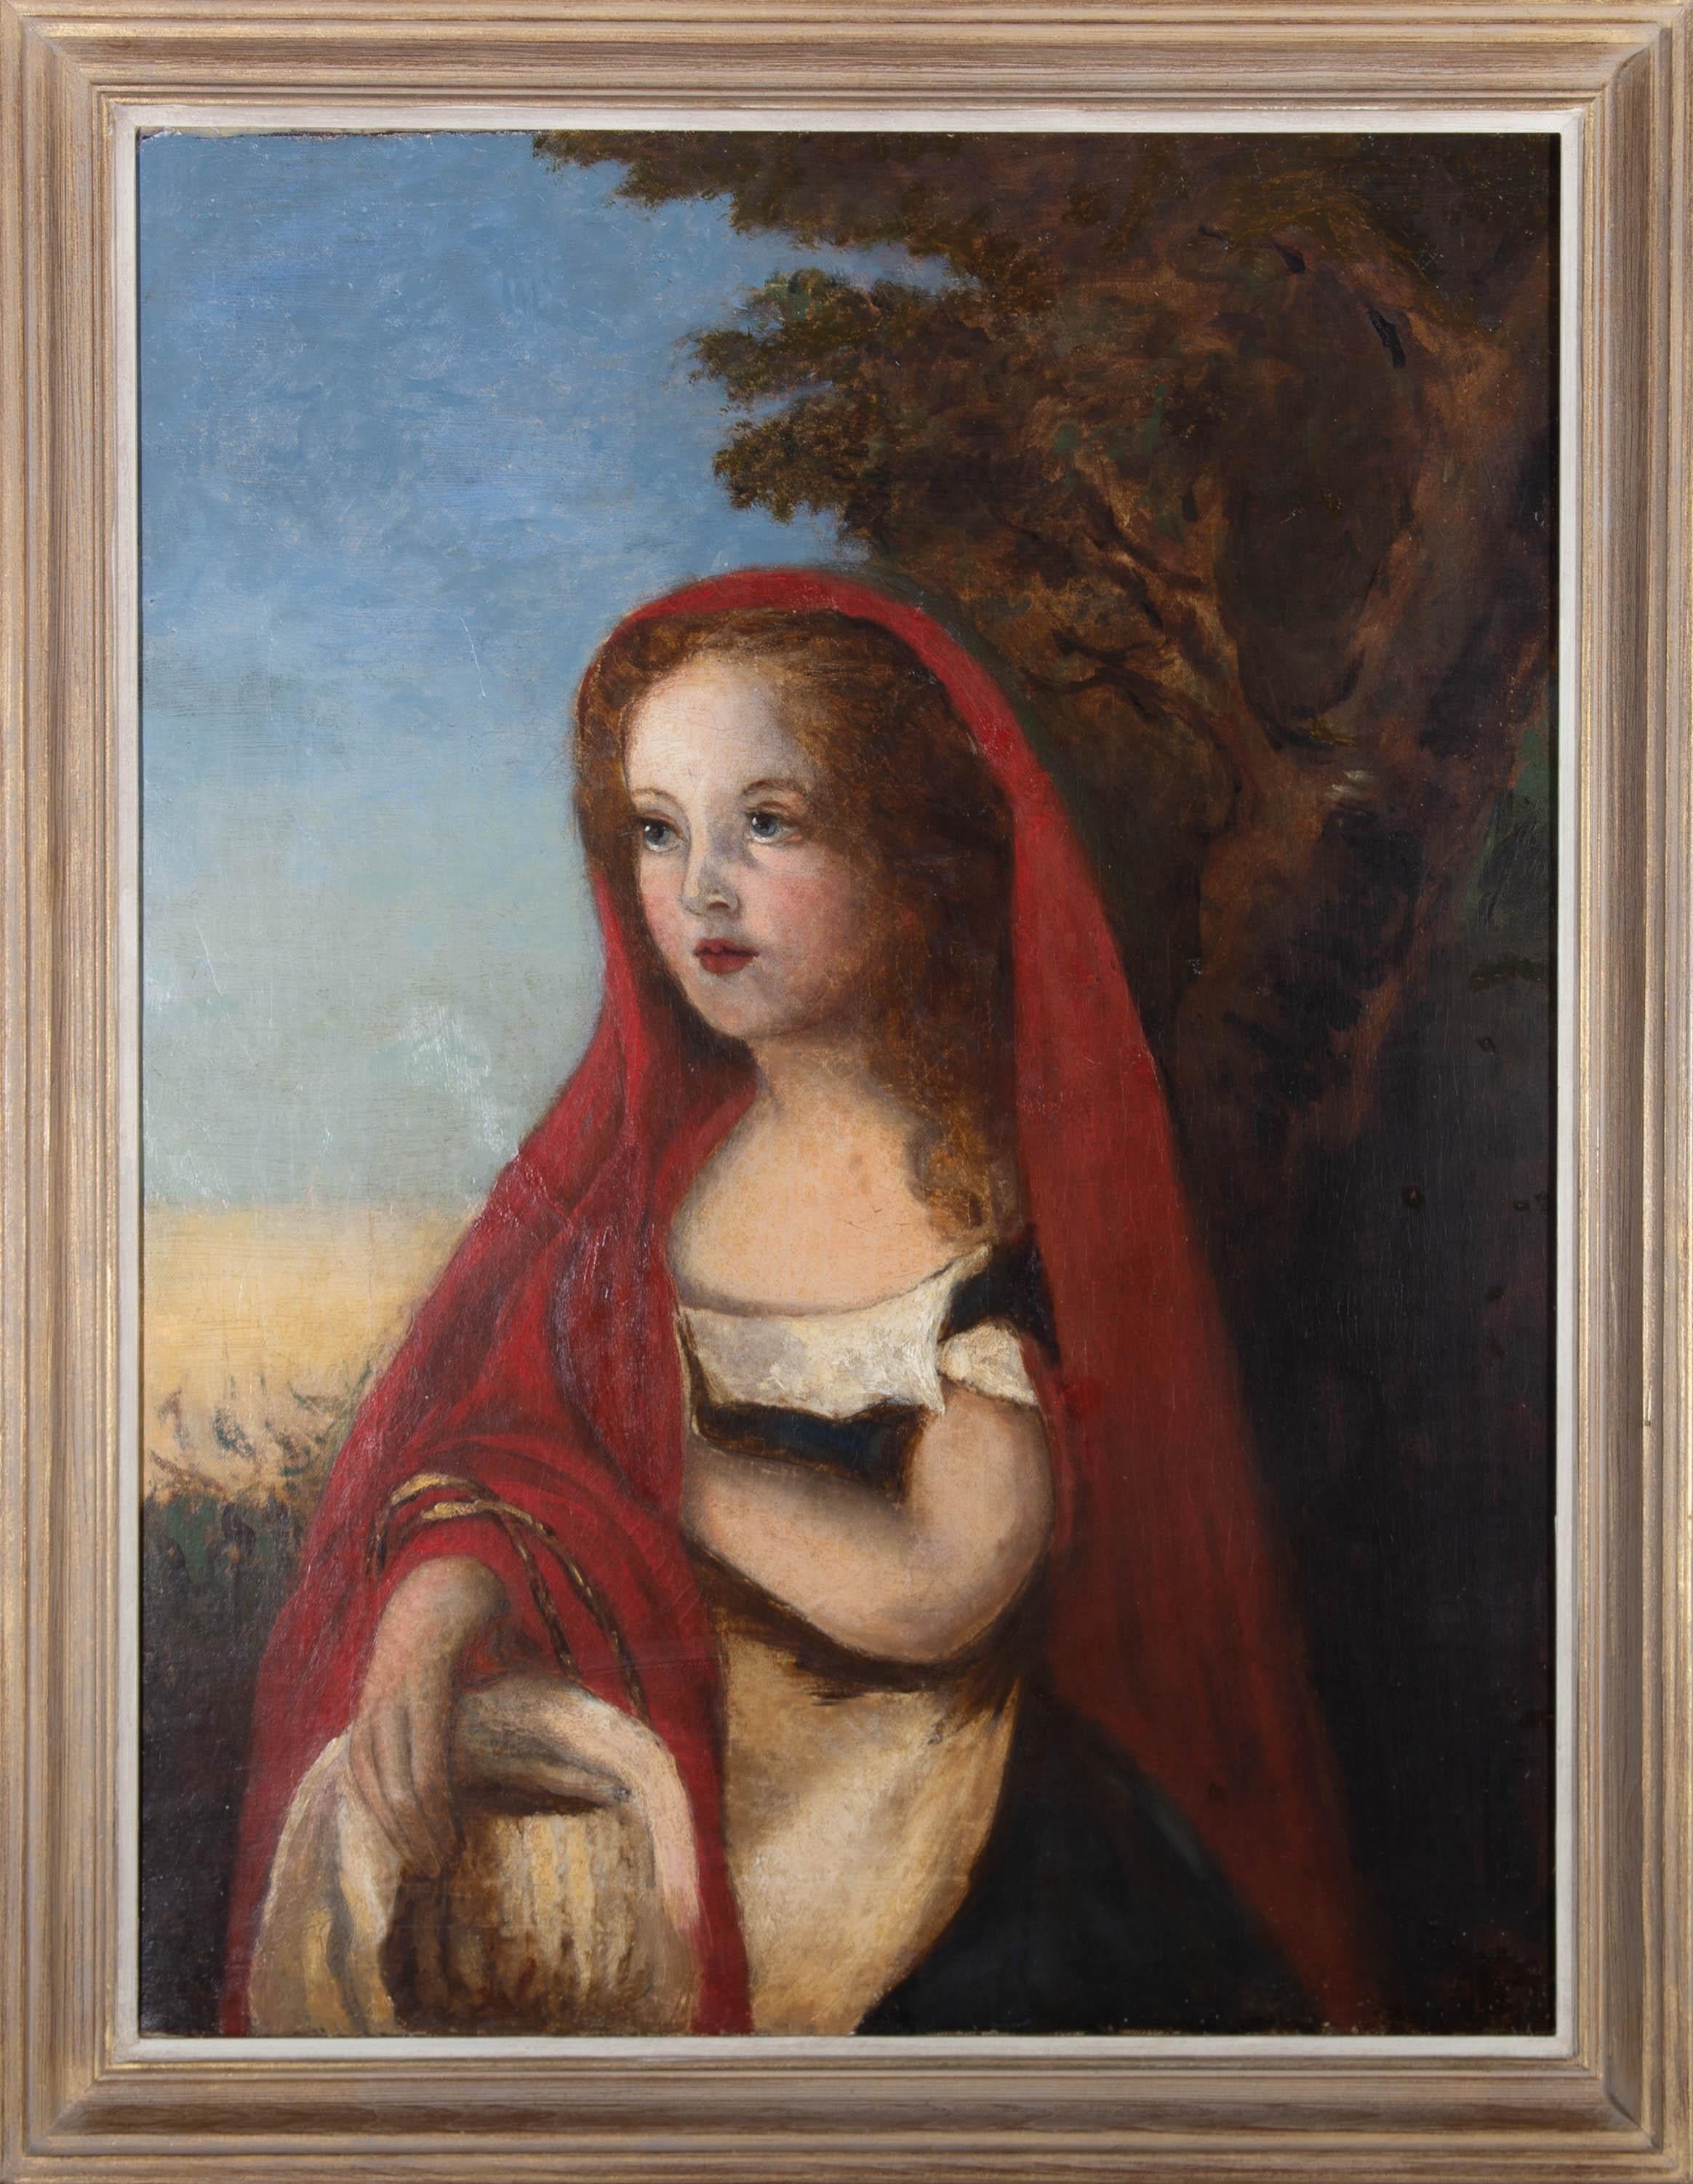 Unknown Portrait Painting - Mid 19th Century Oil - Little Girl In Red